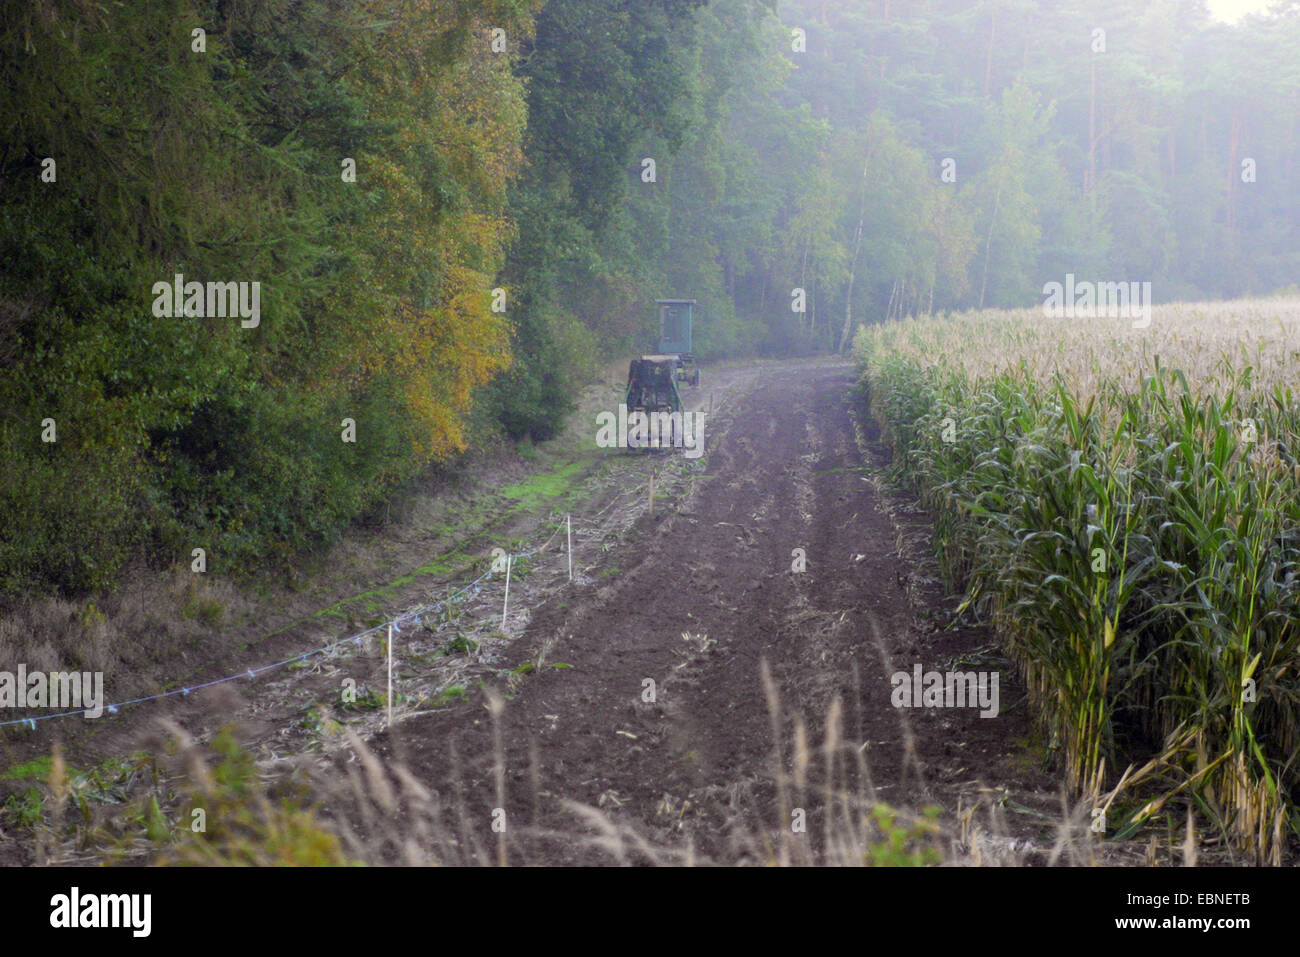 Indian corn, maize (Zea mays), raised high in swath between forest and maize field, Germany, Lower Saxony Stock Photo